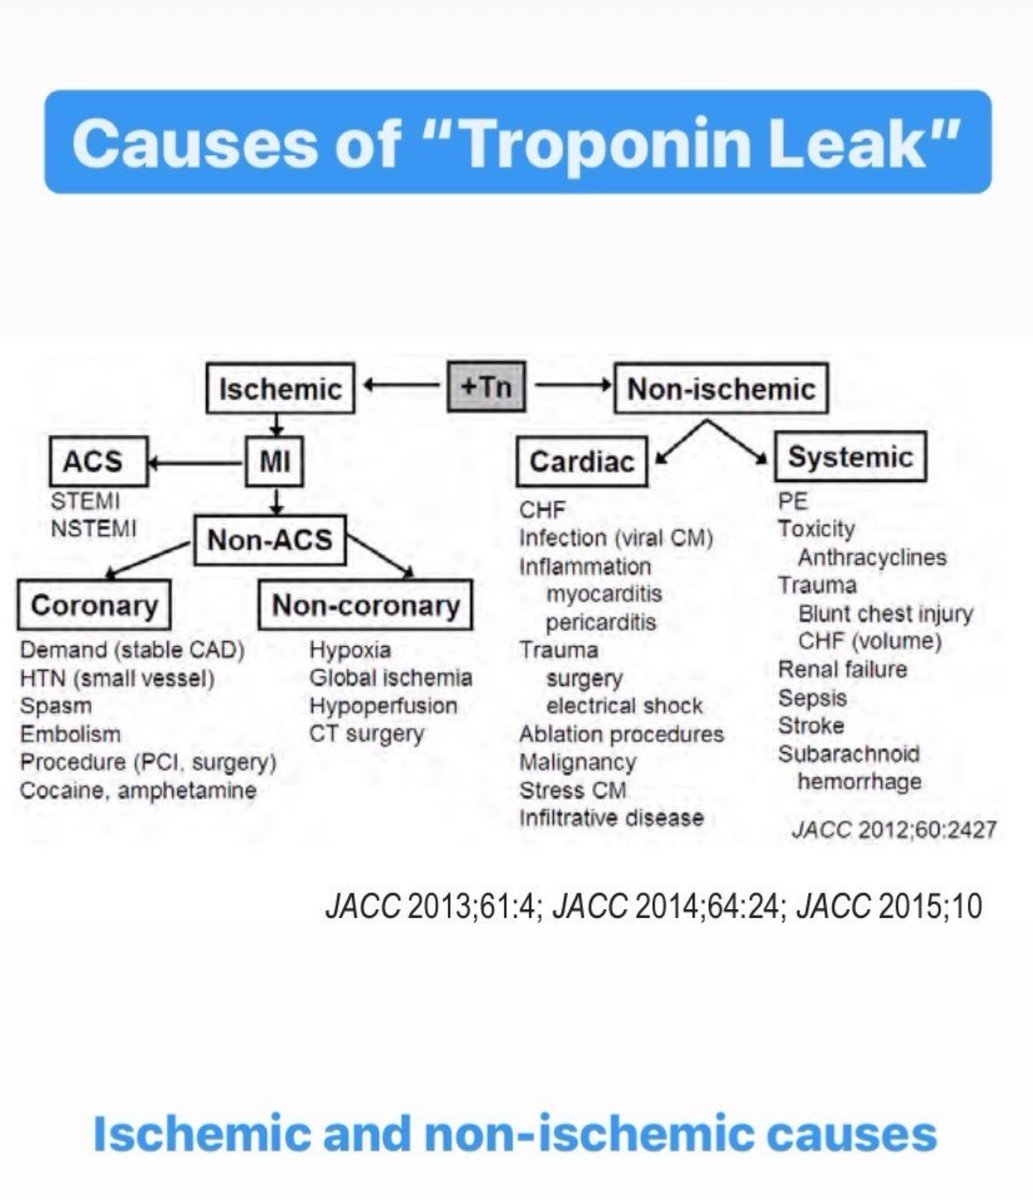 “Not all that leaks troponin is an MI”

🔑 concept: troponin elevation, ischemic and nonischemic causes 📚